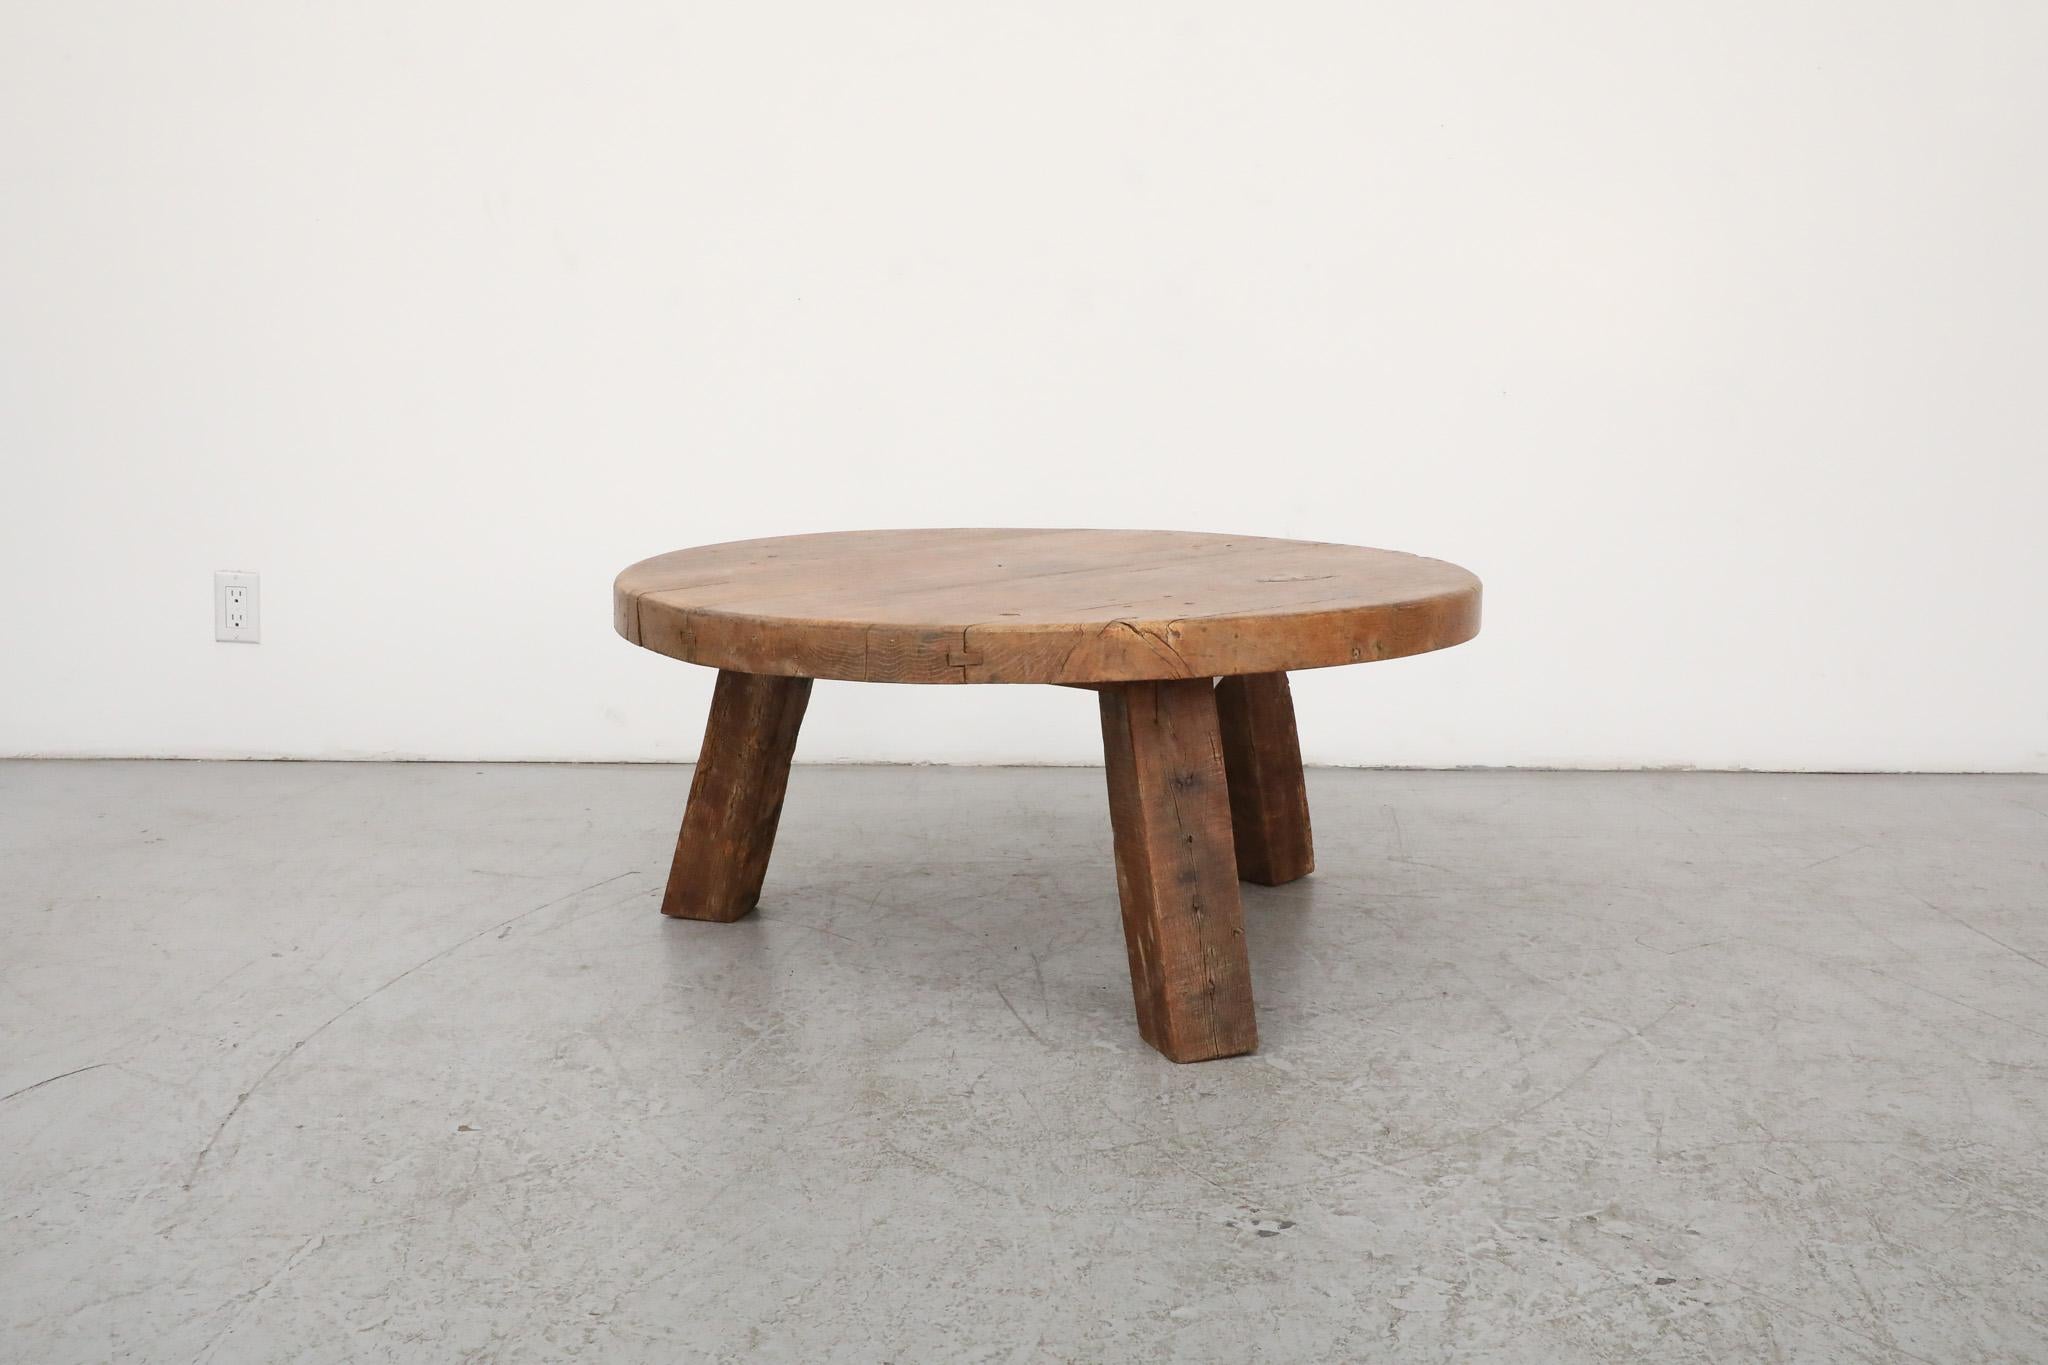 This 1960's Pierre Chapo Inspired heavy Brutalist coffee table is made from solid oak, with a hand waxed finish, round top and fat tripod legs. In original condition with visible wear, including some natural cracking. Wear is consistent with its age